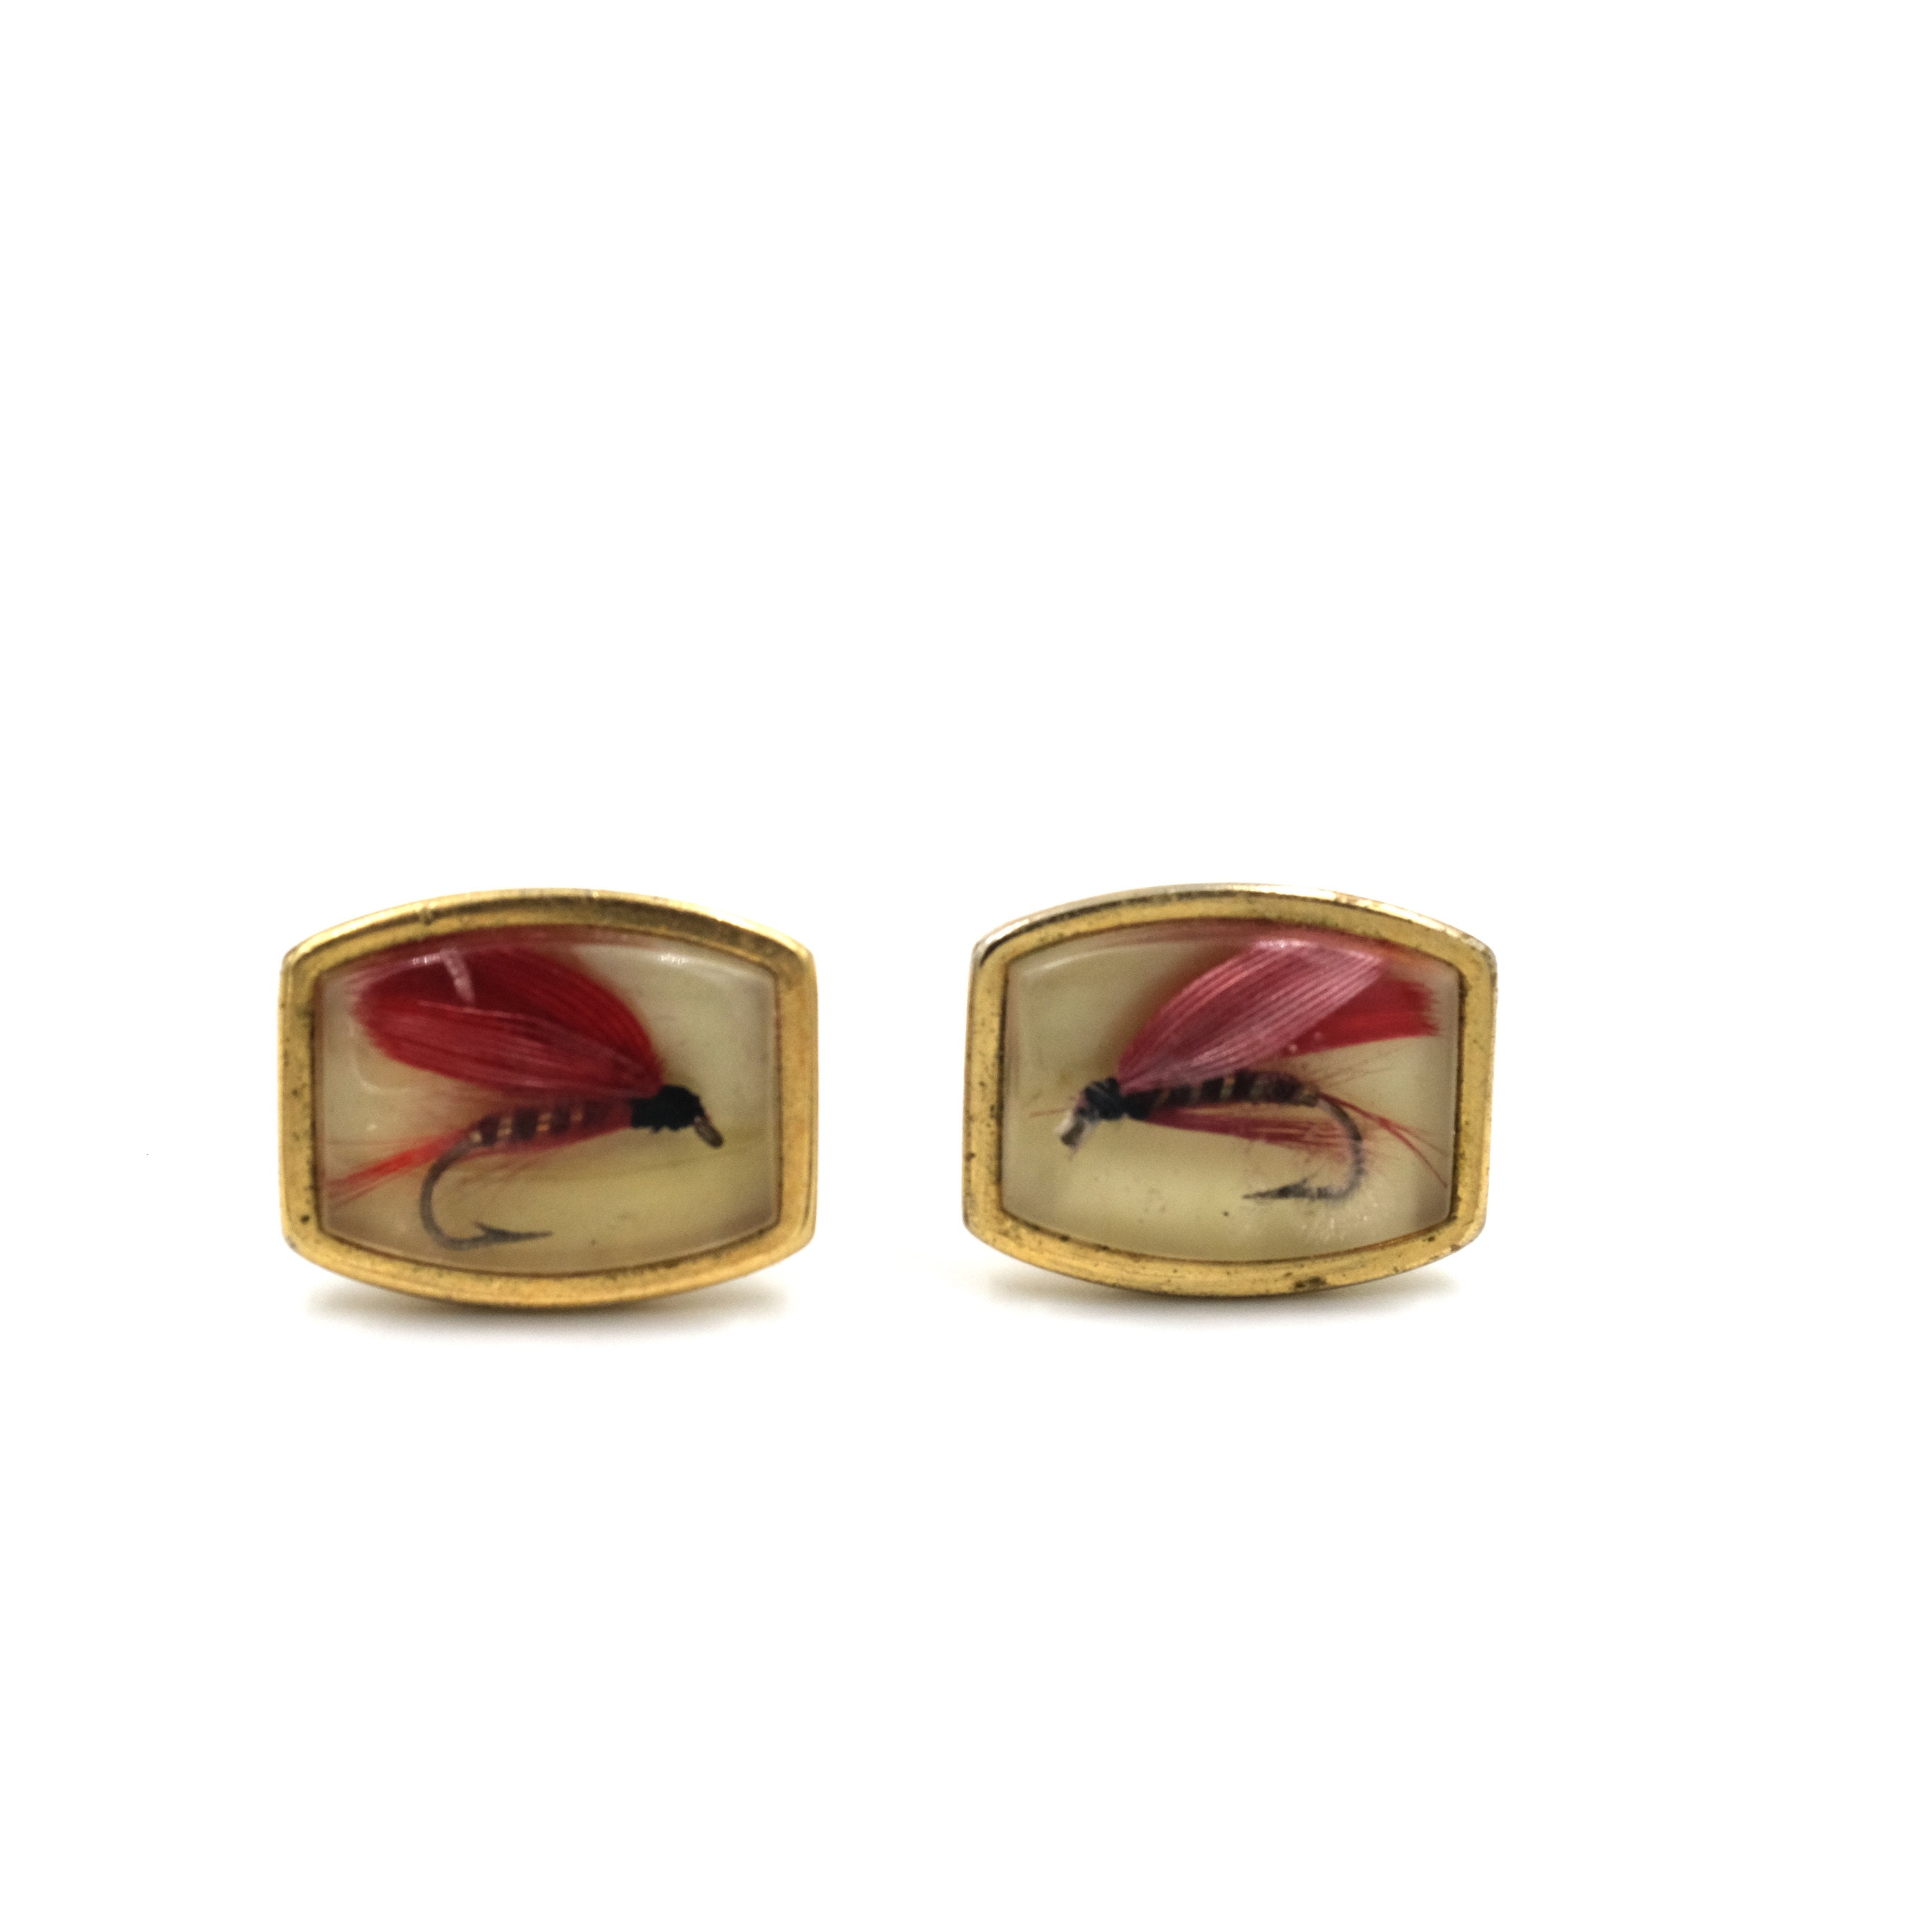 Vintage Fly Fishing Lure Cufflinks // Anson Cufflinks // Gifts for Dad // Fisherman Accesories